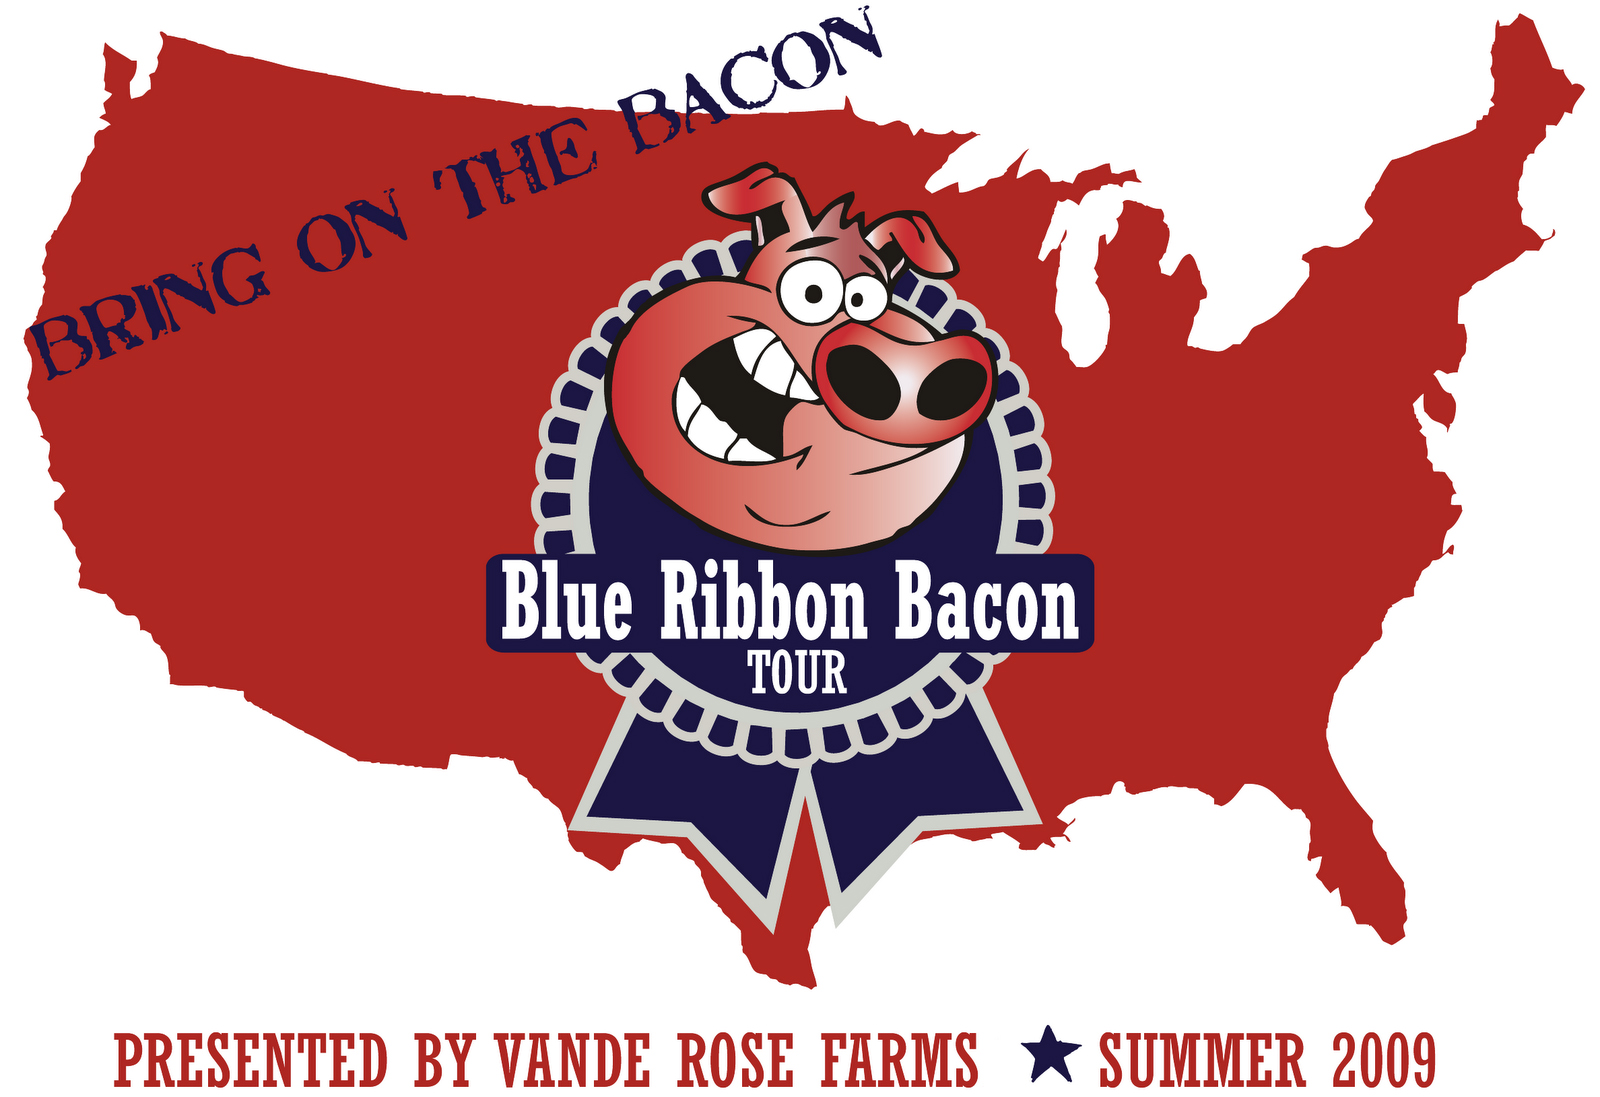 The Blue Ribbon Bacon Tour is coming to Phoenix, Arizona on June 7!